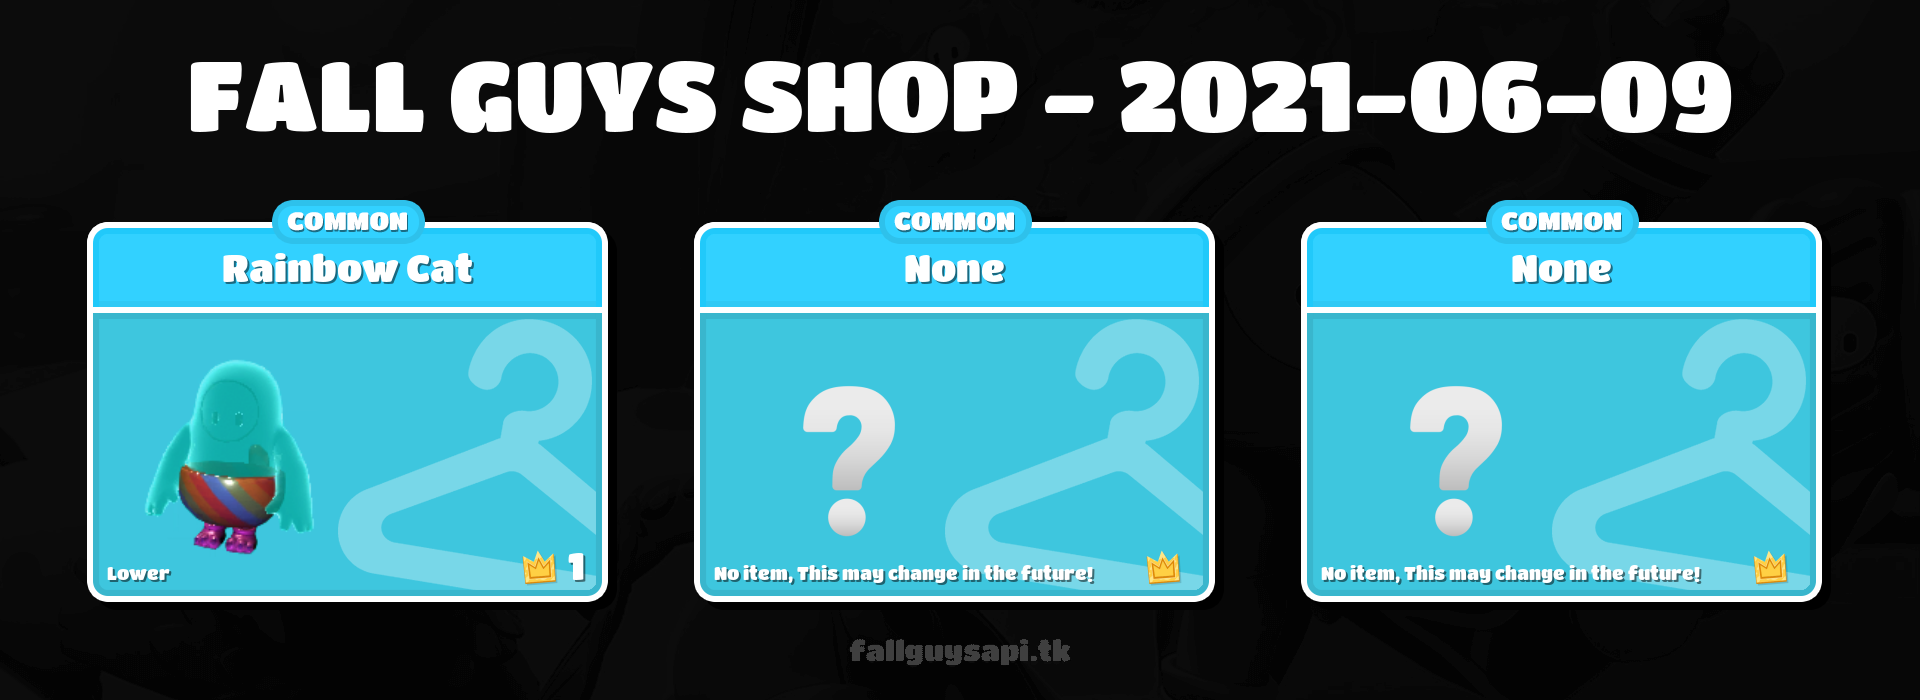 Fall Guys: Ultimate Knockout - [S4] Featured shop - What's on sale? - Jun 09 - Jun 12